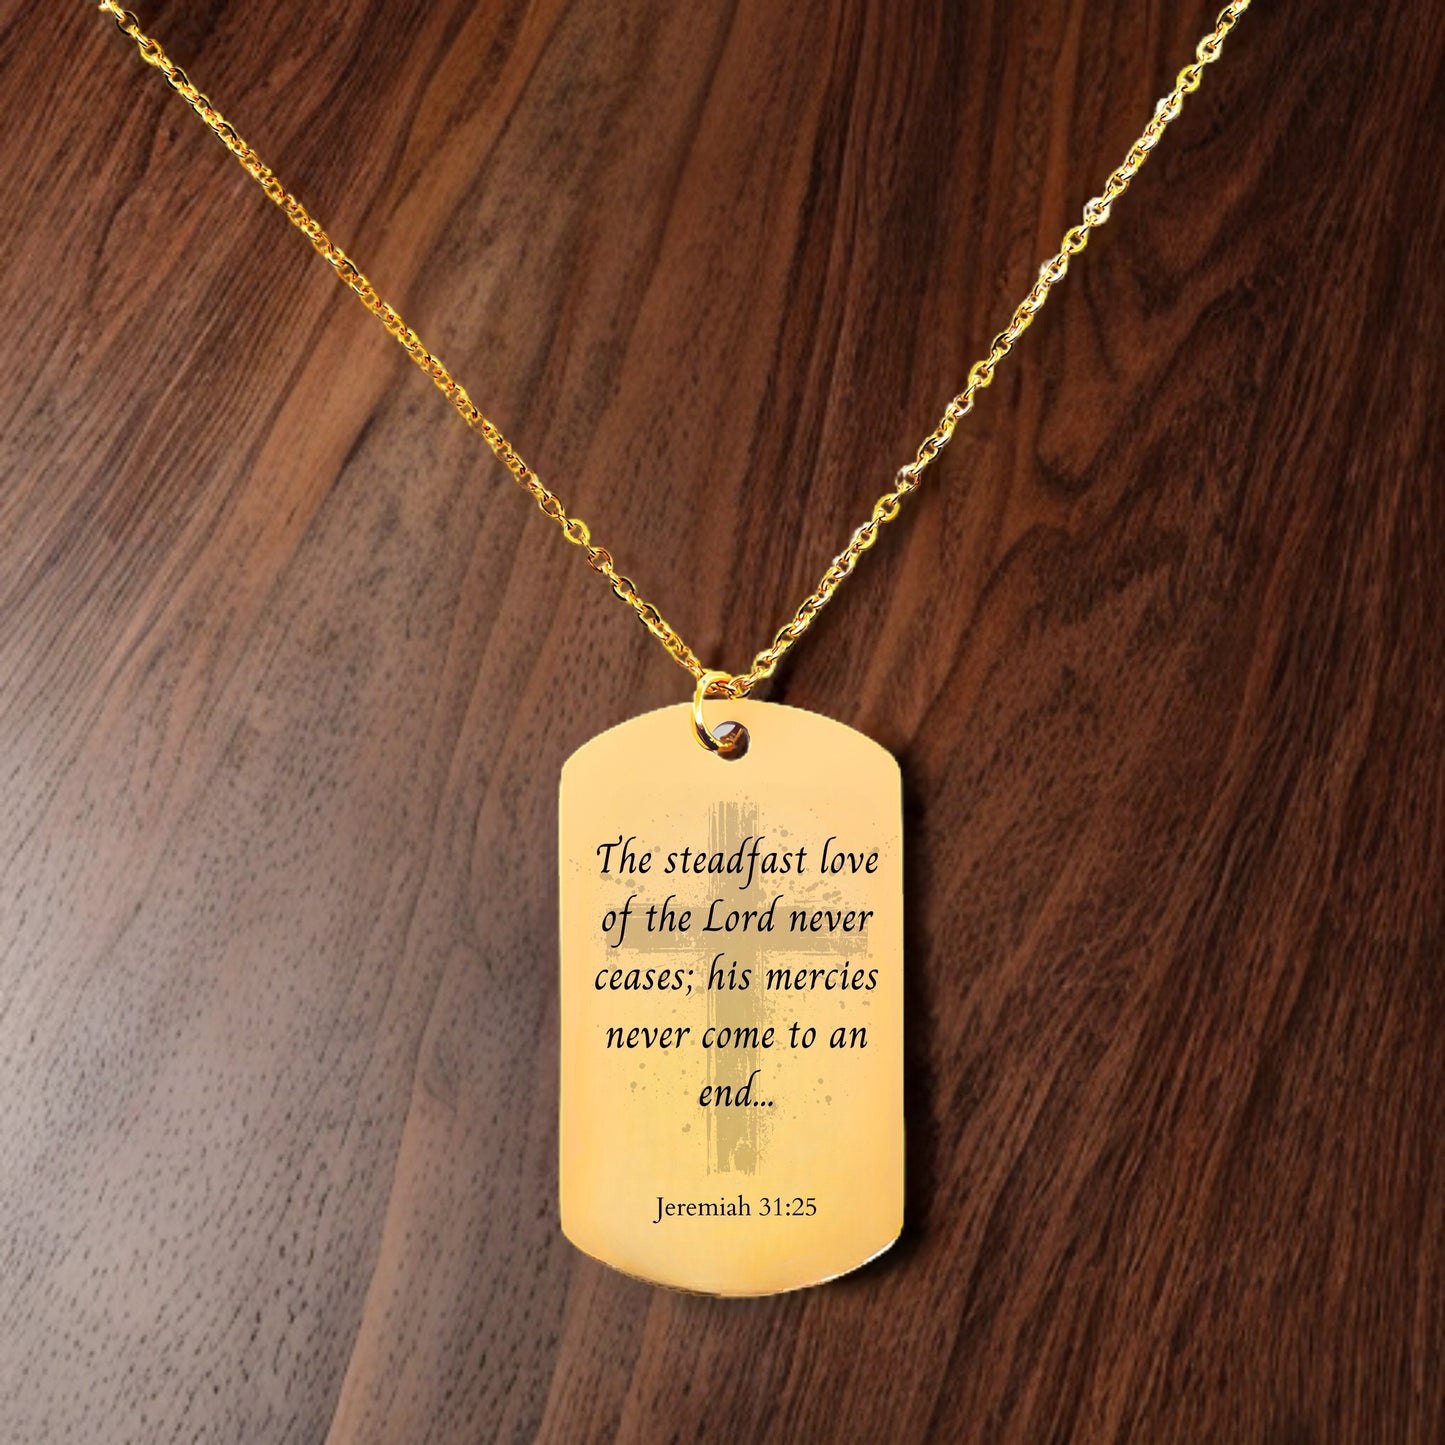 Jeremiah 31 25 quote necklace, gold bible verse, 14k gold cross charm necklace, confirmation gift, gold bar tag necklace,religious scripture